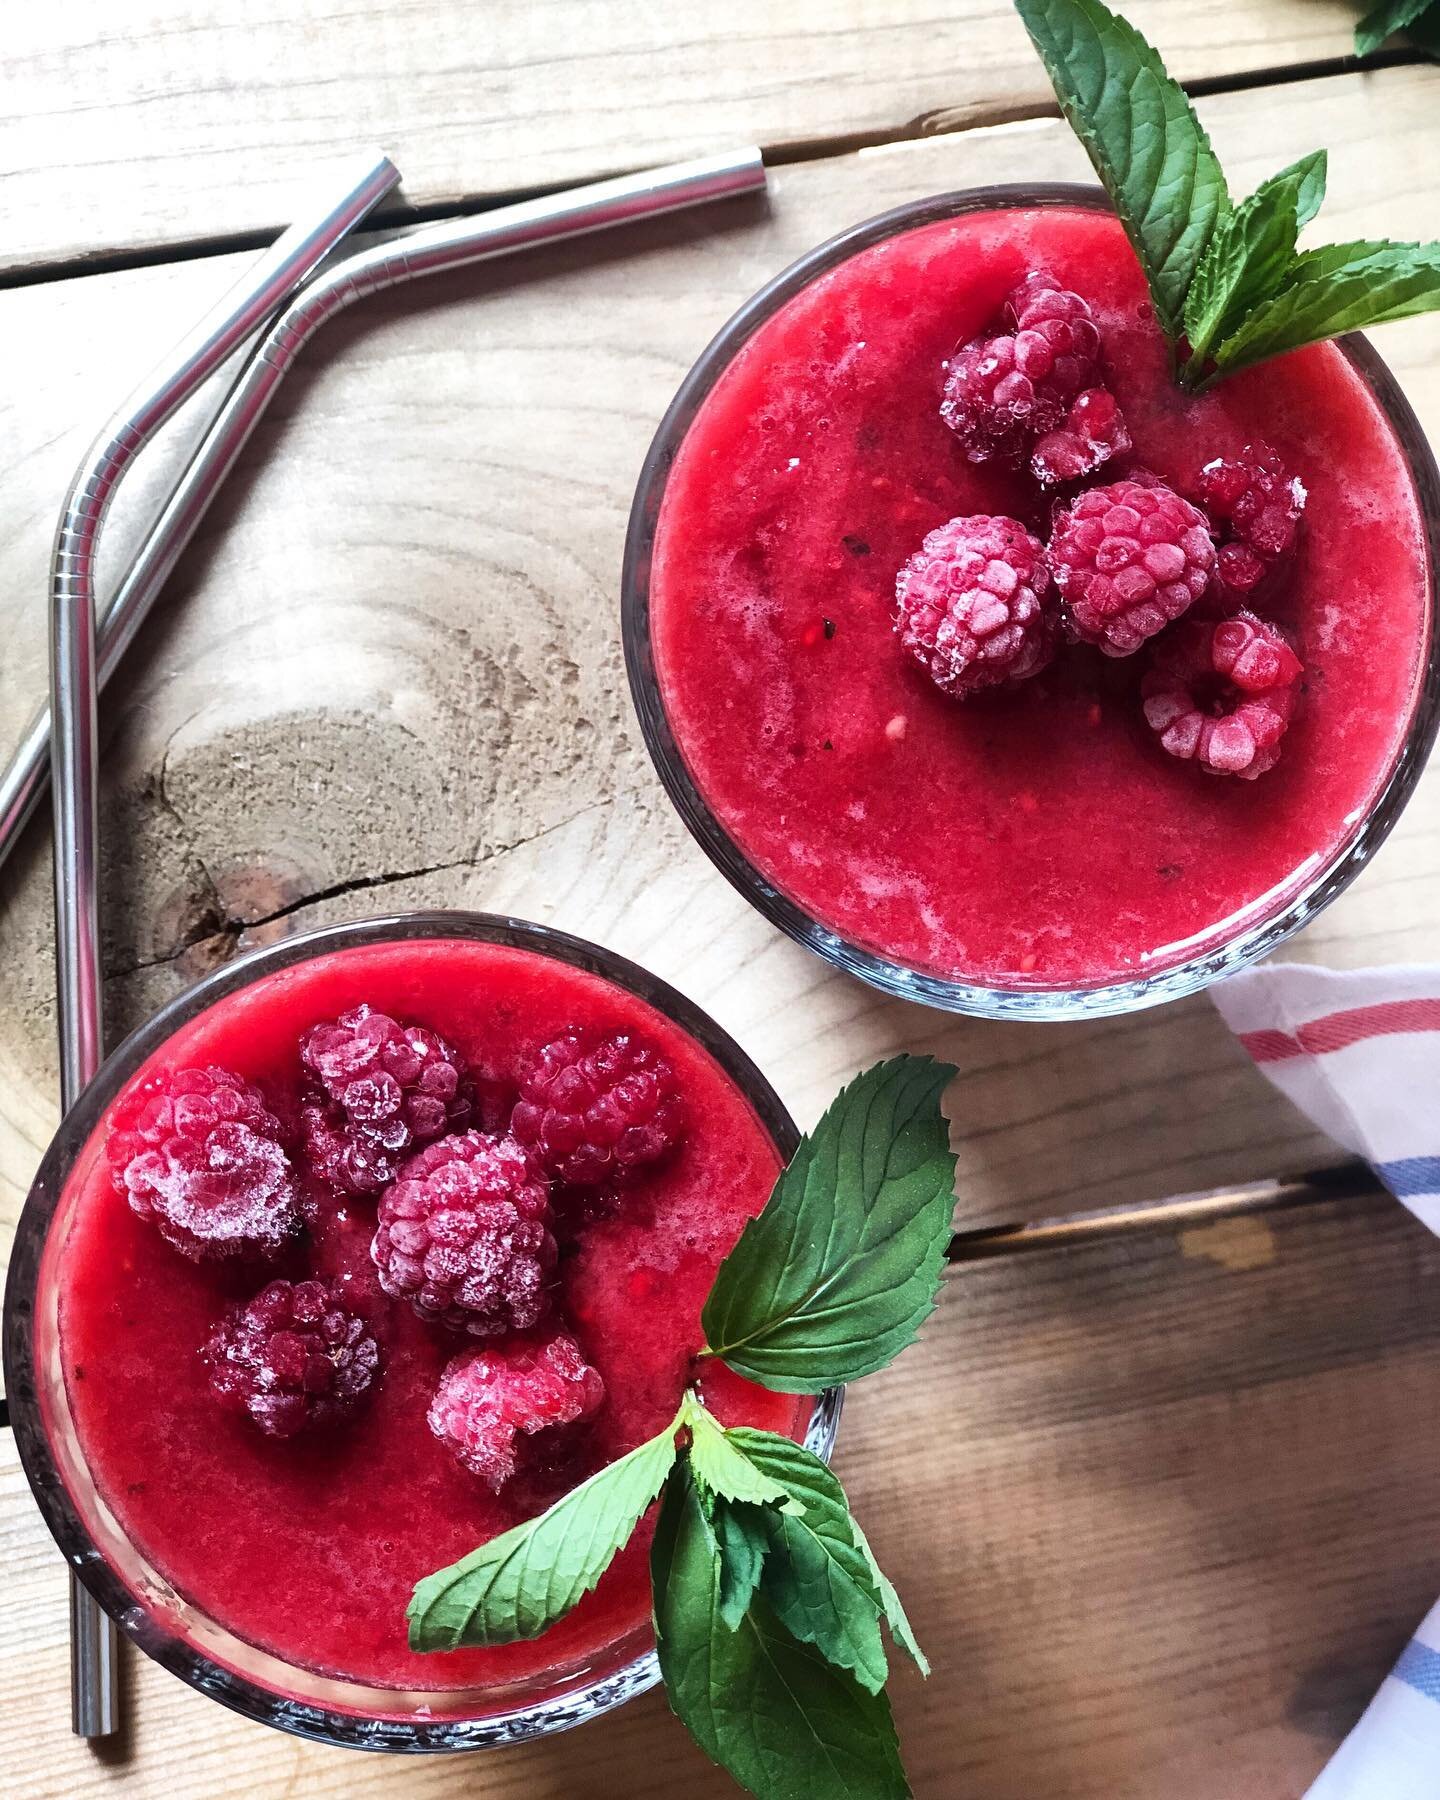 Don&rsquo;t forget to make my Watermelon, Raspberry and Mint smoothies before summer is over! 🍉 
And definitely don&rsquo;t forget to check out my latest article Migrant Farmworkers and Climate Change! It&rsquo;s a v informative and necessary read! 